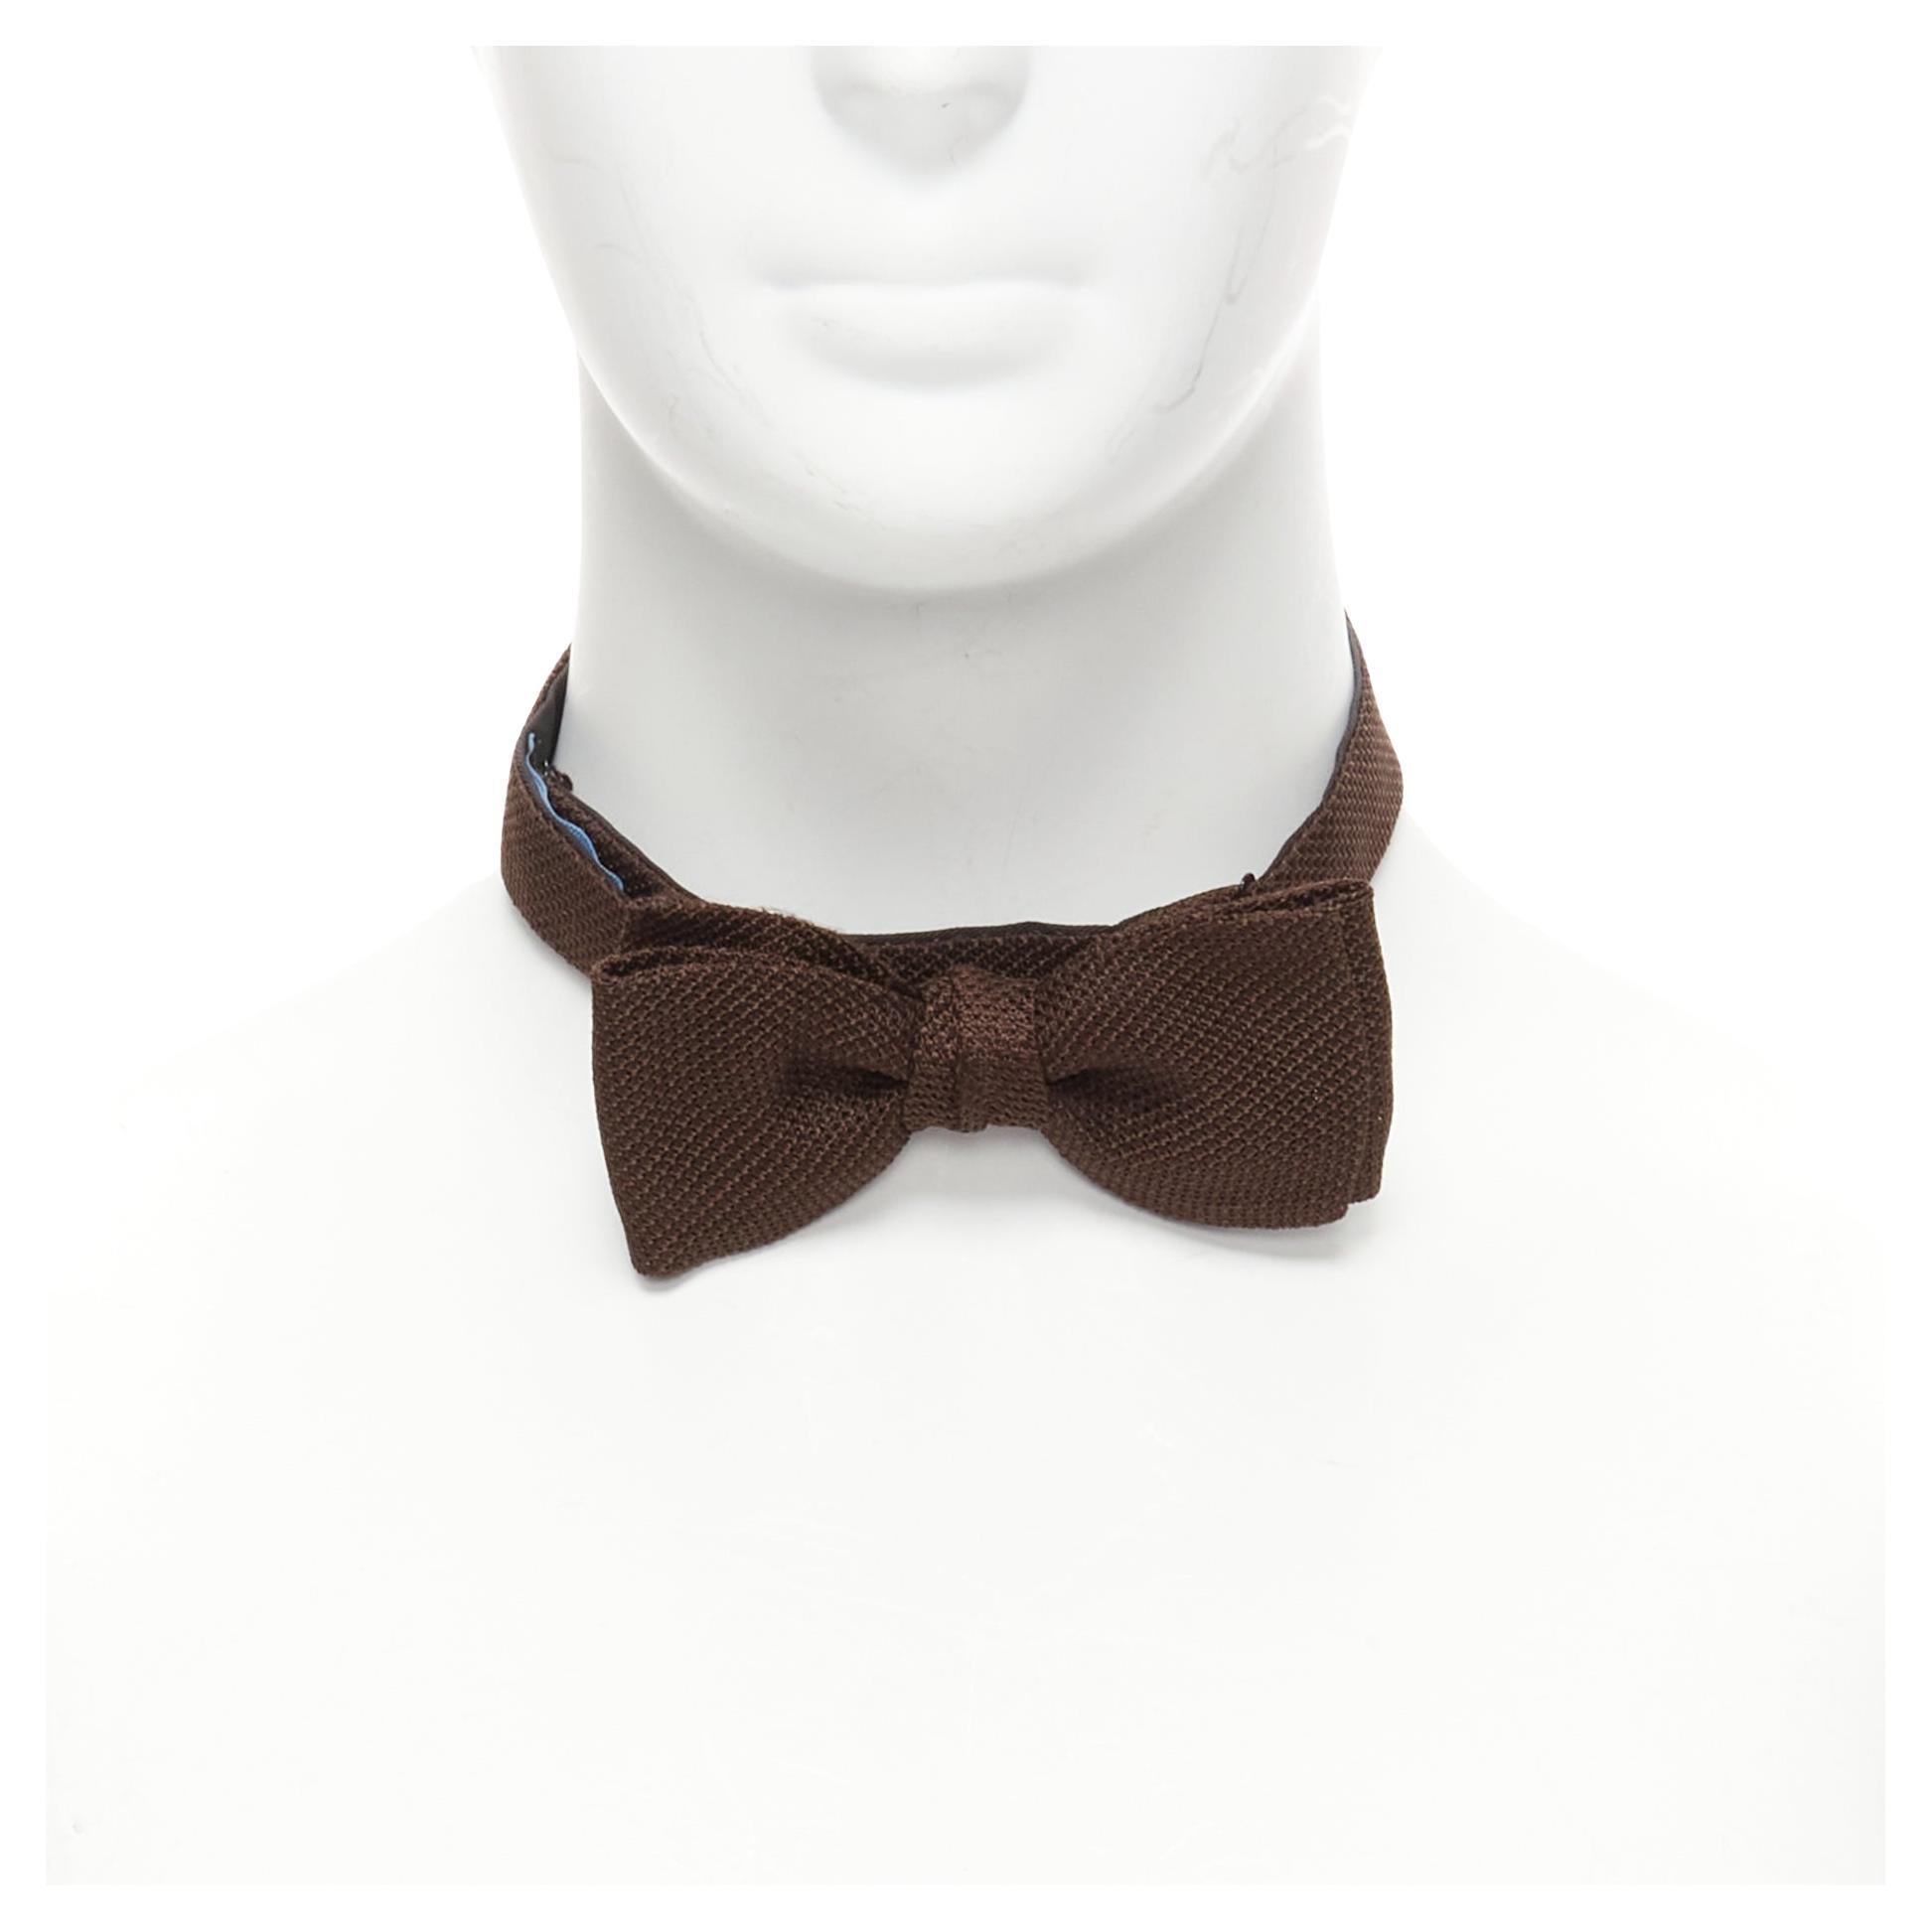 new LANVIN Alber Elbaz brown textured fabric bow tie Adjustable For Sale